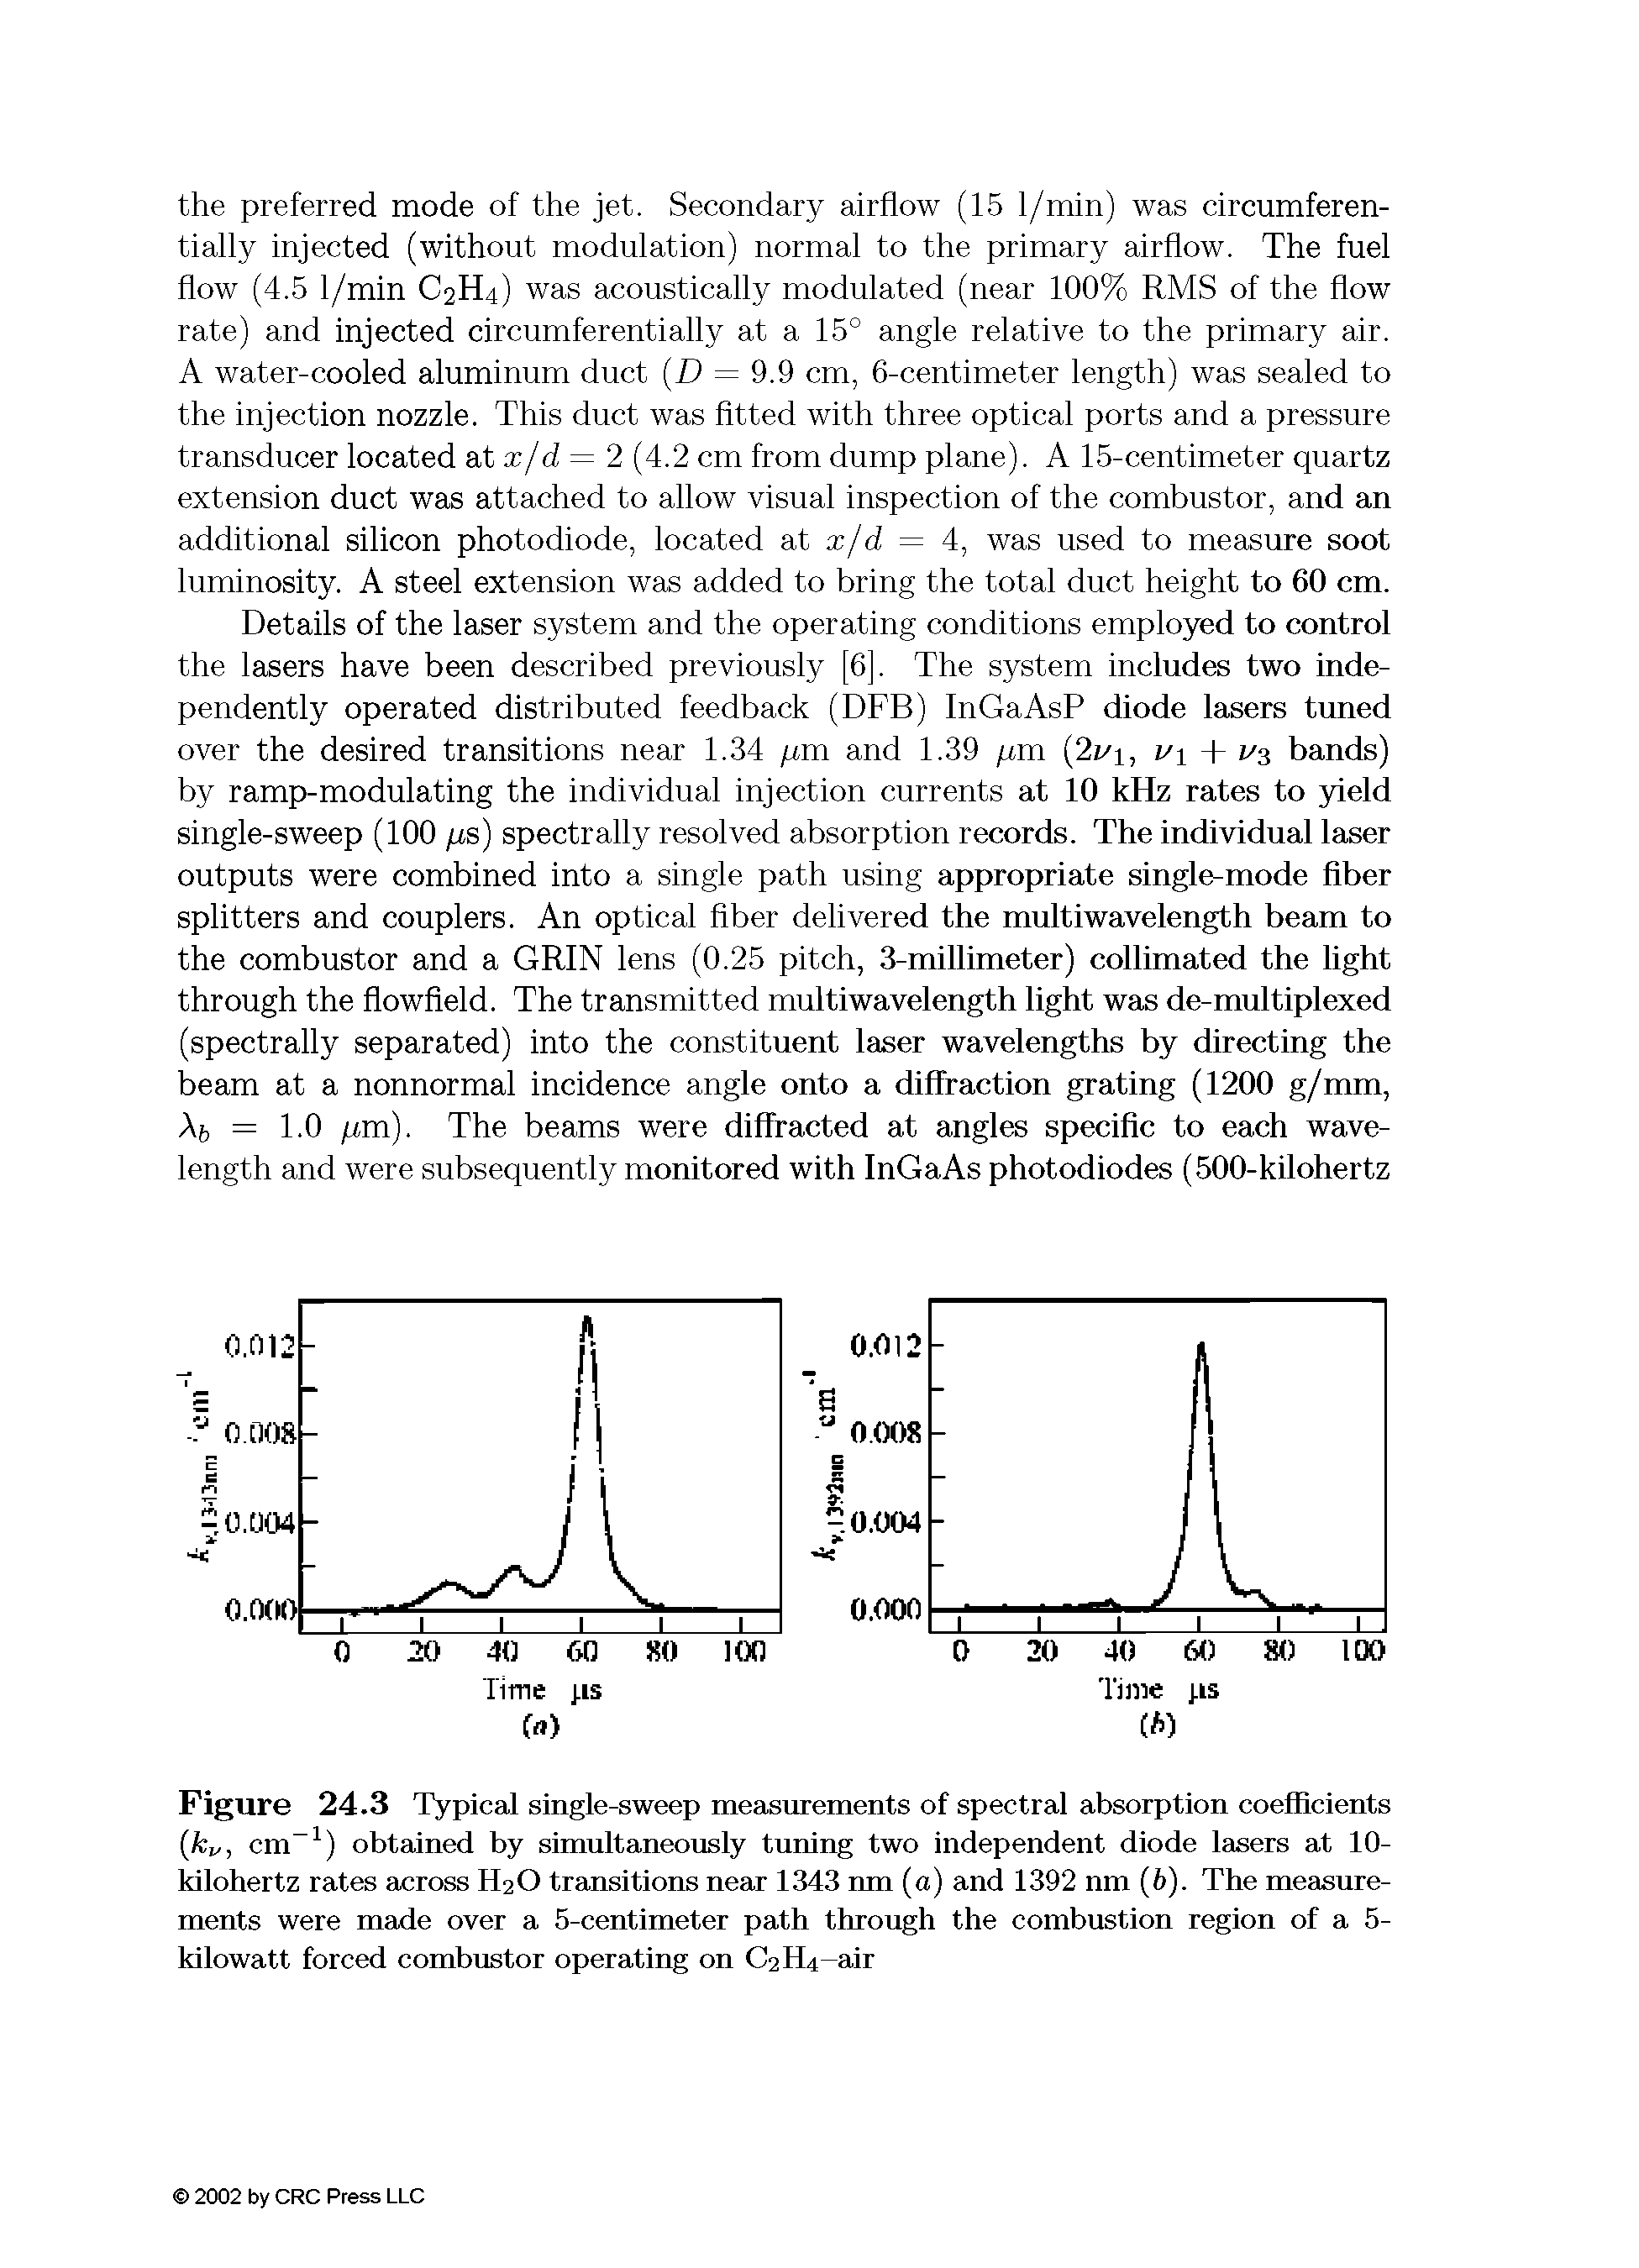 Figure 24.3 Typical single-sweep measurements of spectral absorption coefficients kv, cm ) obtained by simuftaneousiy tuning two independent diode fasers at 10-kifohertz rates across H2O transitions near 1343 run (a) and 1392 nm (6). The measurements were made over a 5-centimeter path through the combustion region of a 5-kifowatt forced combustor operating on C2H4-air...